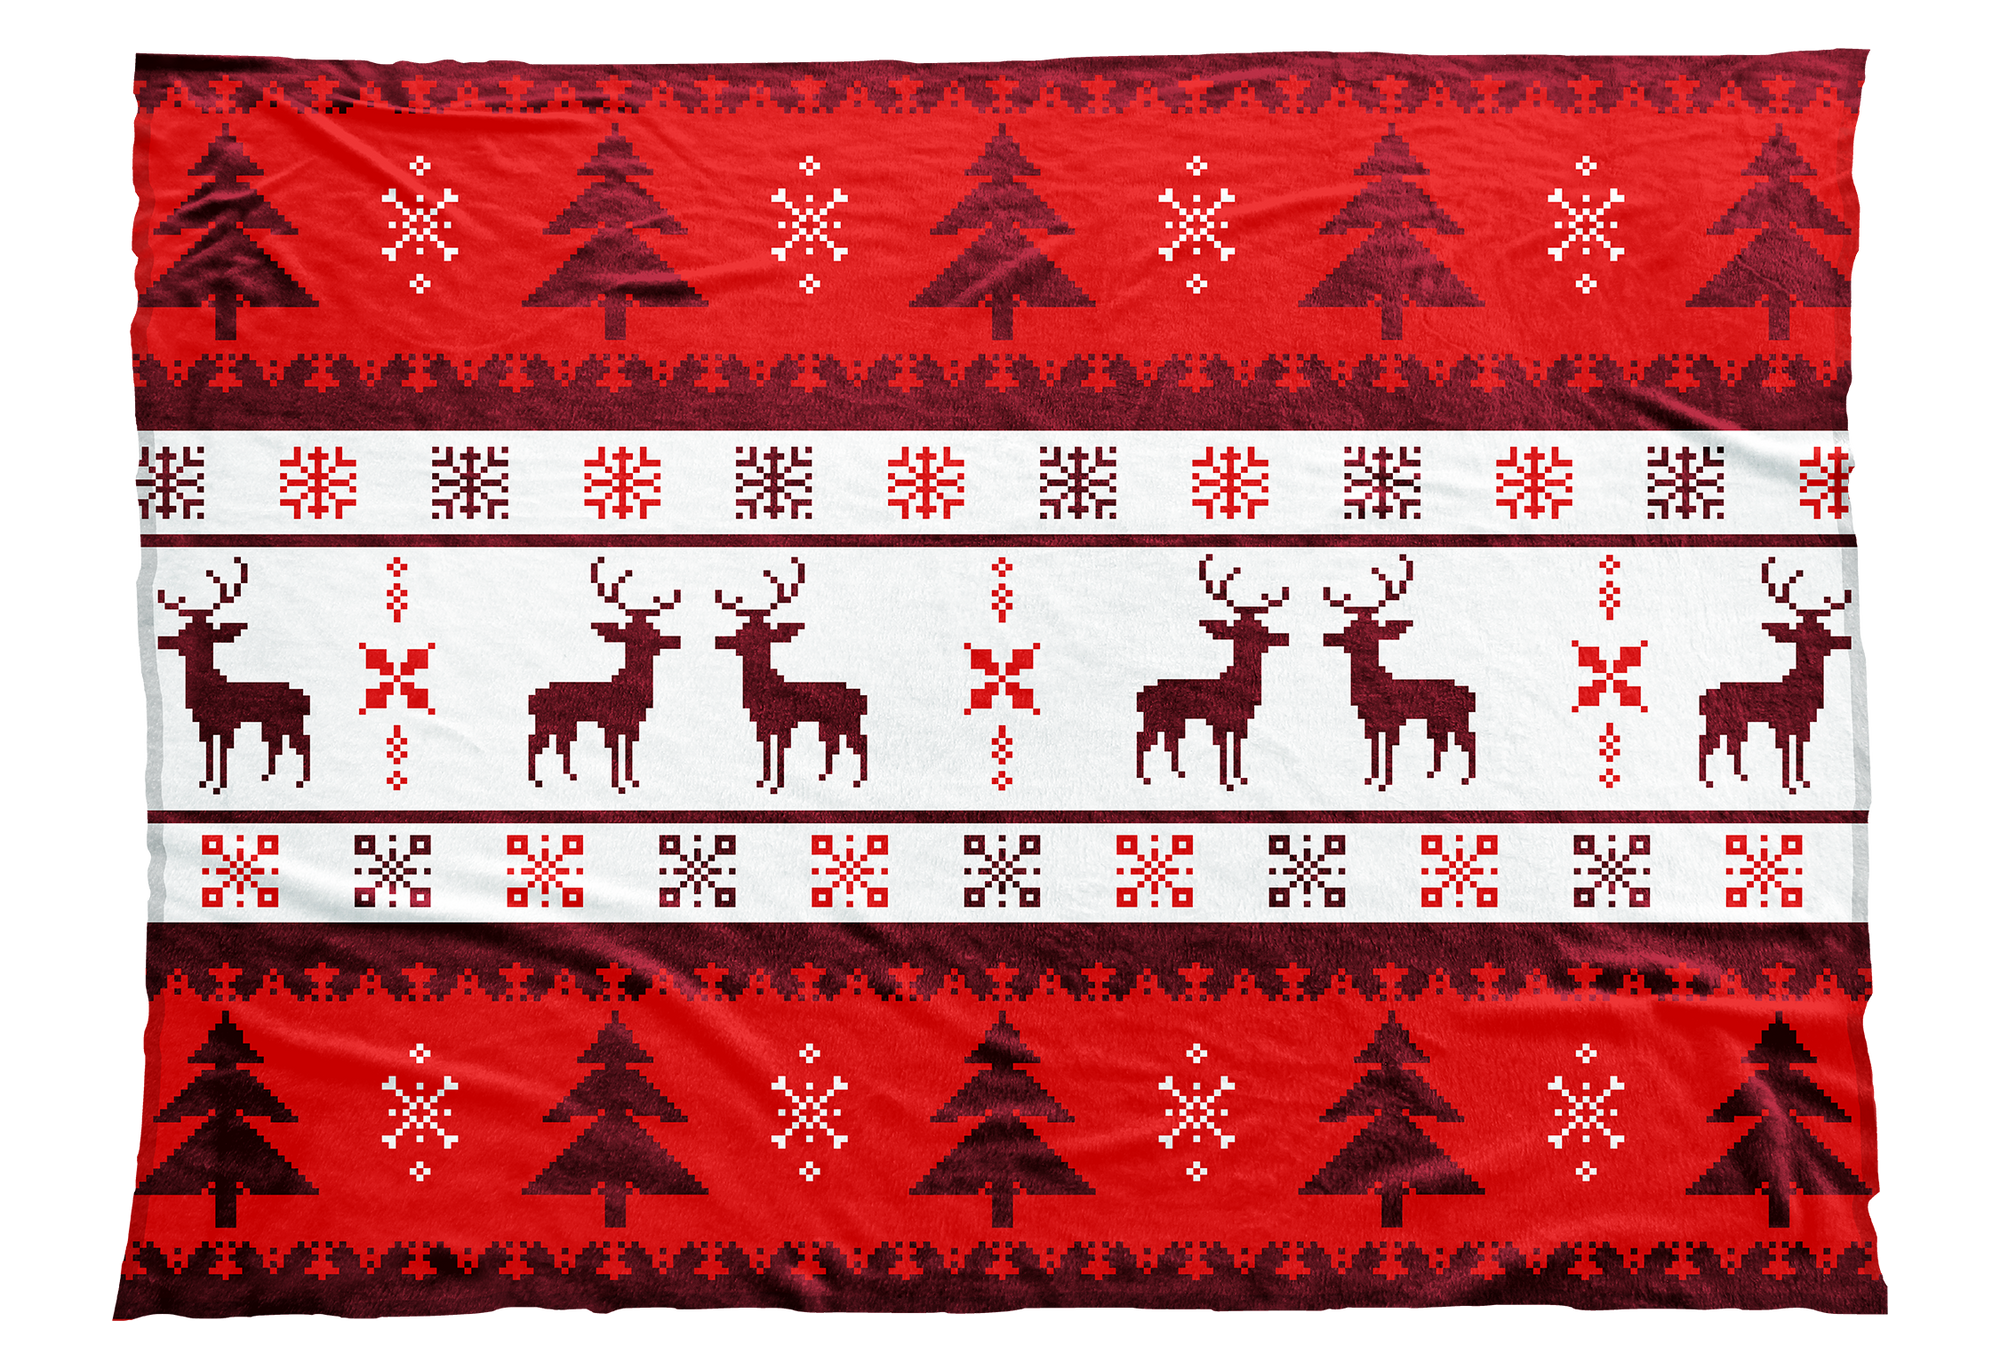 Reindeer, snowflakes, and Christmas trees adorn this Christmas sweater-inspired blanket design in red. Perfect for Christmas and appropriate for the entire winter season.